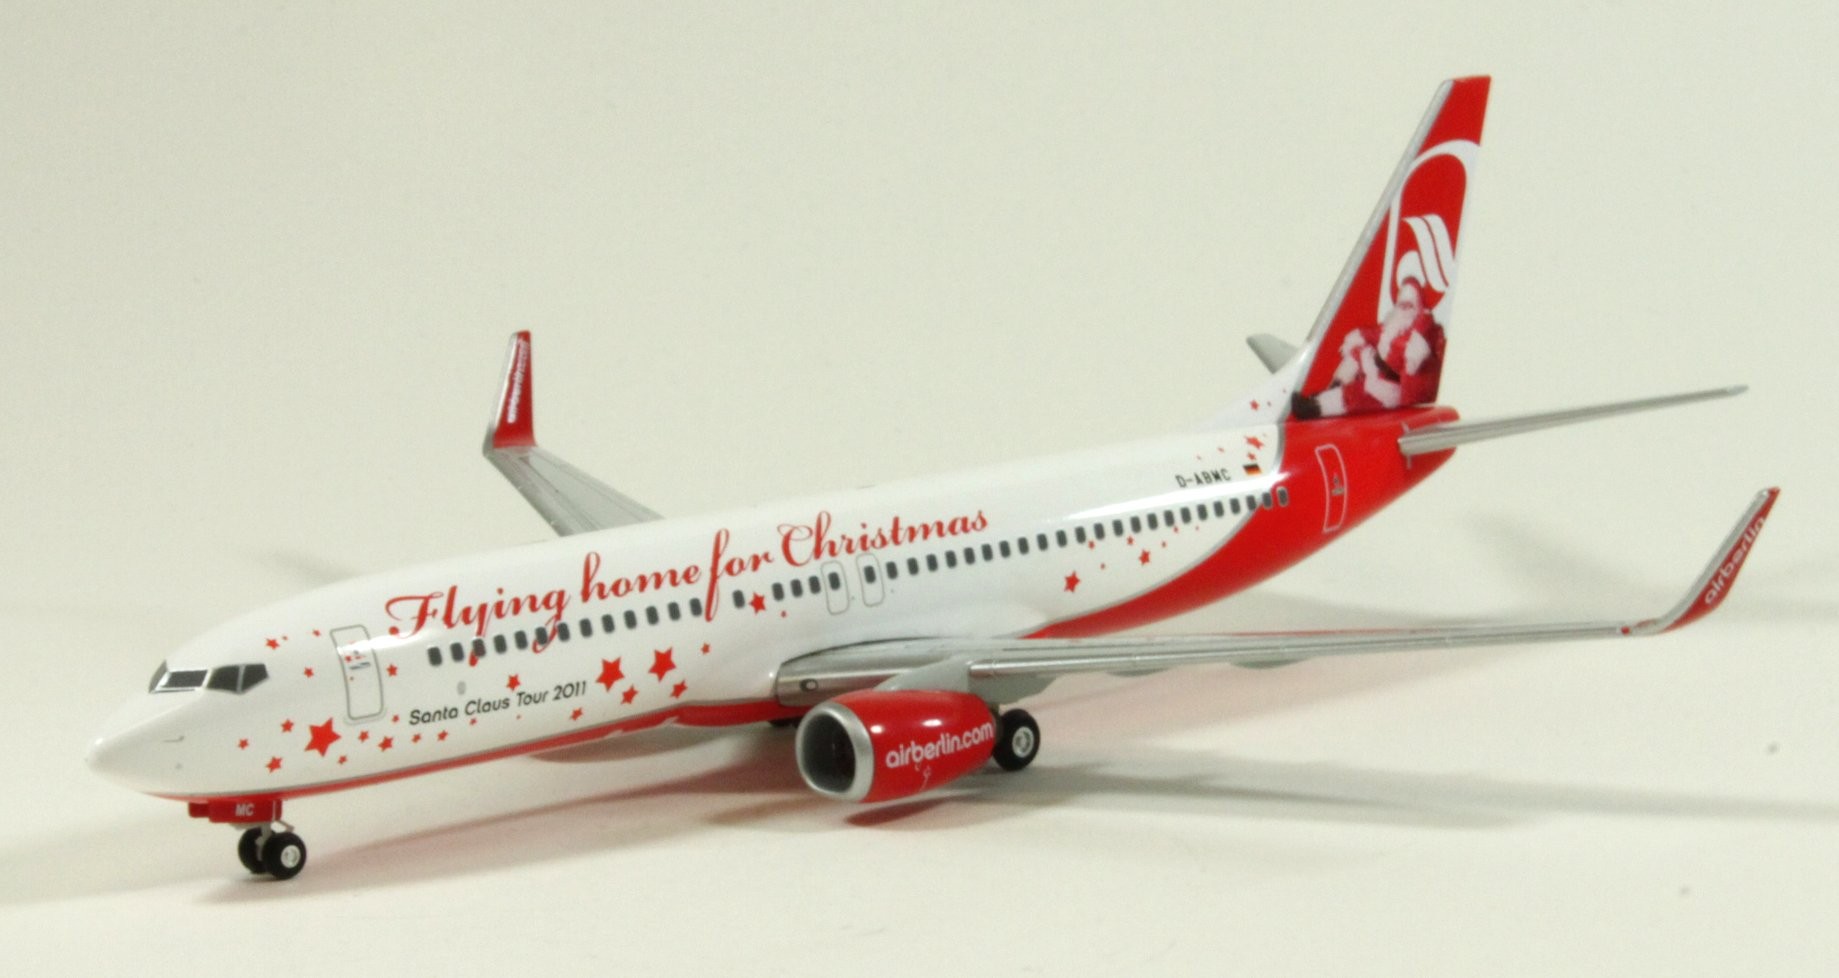 Sale! Air Berlin Boeing 737-800 Flying home for Christmas 555364 Scale 1:200